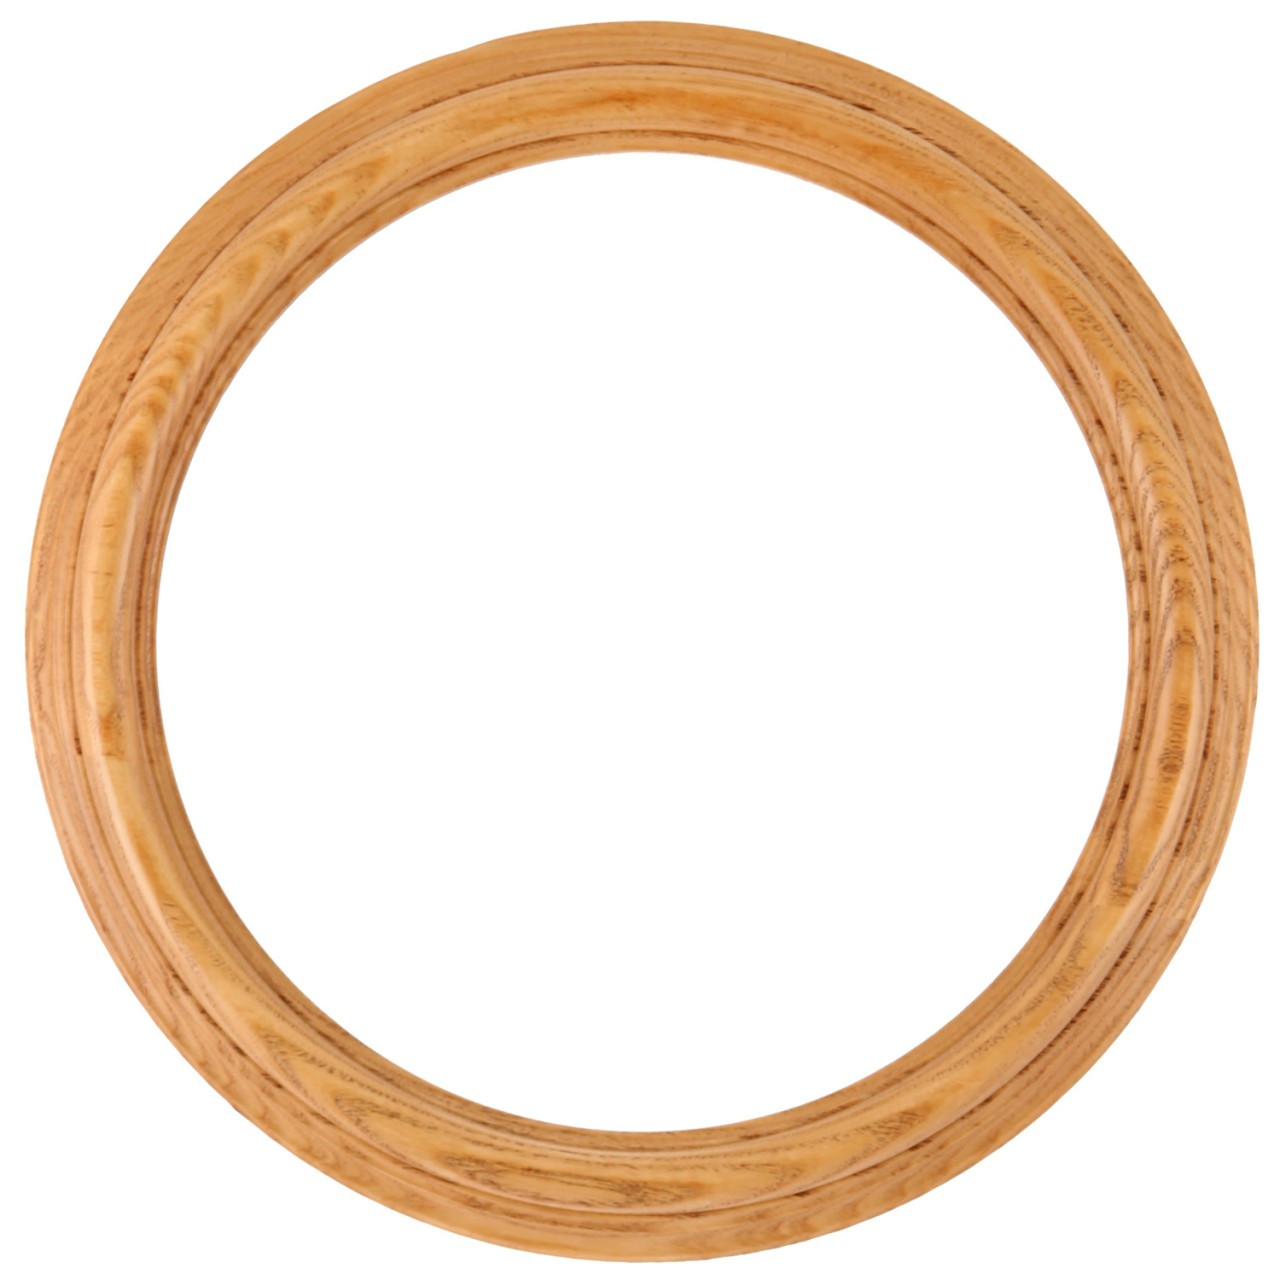 Round Frame In Carmel Finish Solid Wood Oak Picture Frames